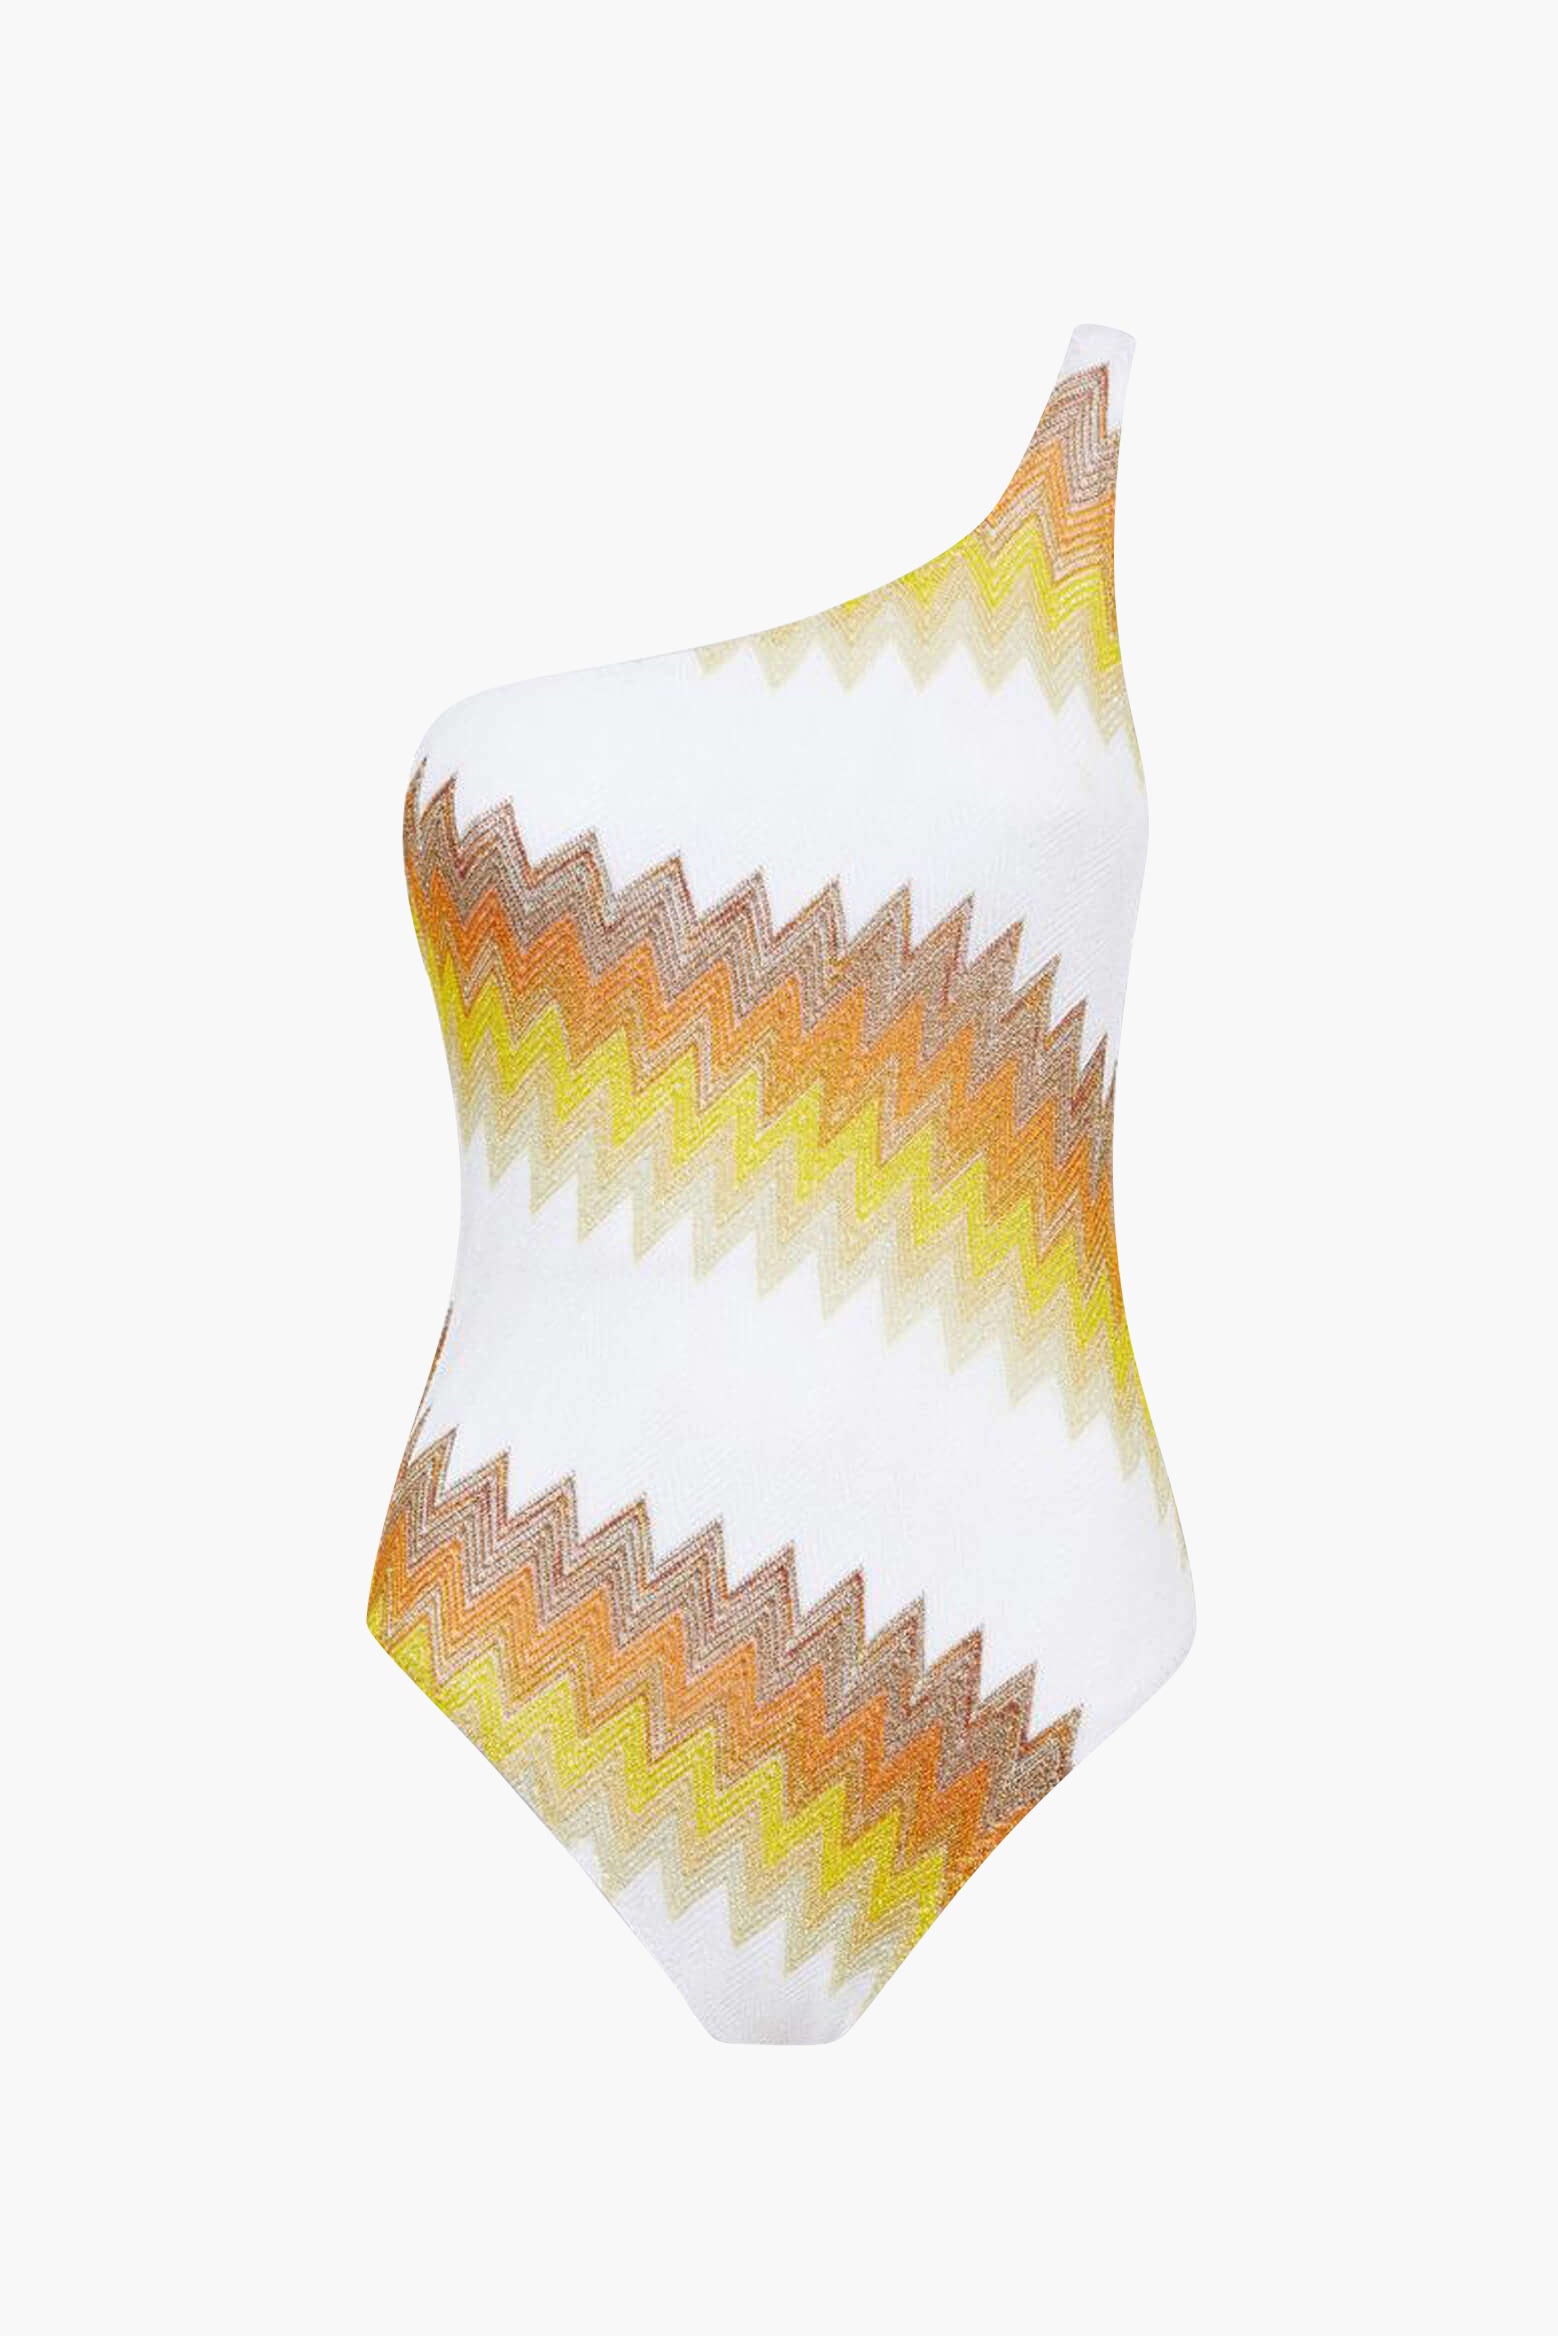 Missoni Mare Zig Zag Asymmetric One Piece in White/Yellow/Ochre available at TNT The New Trend Australia. Free shipping on orders over $300 AUD.